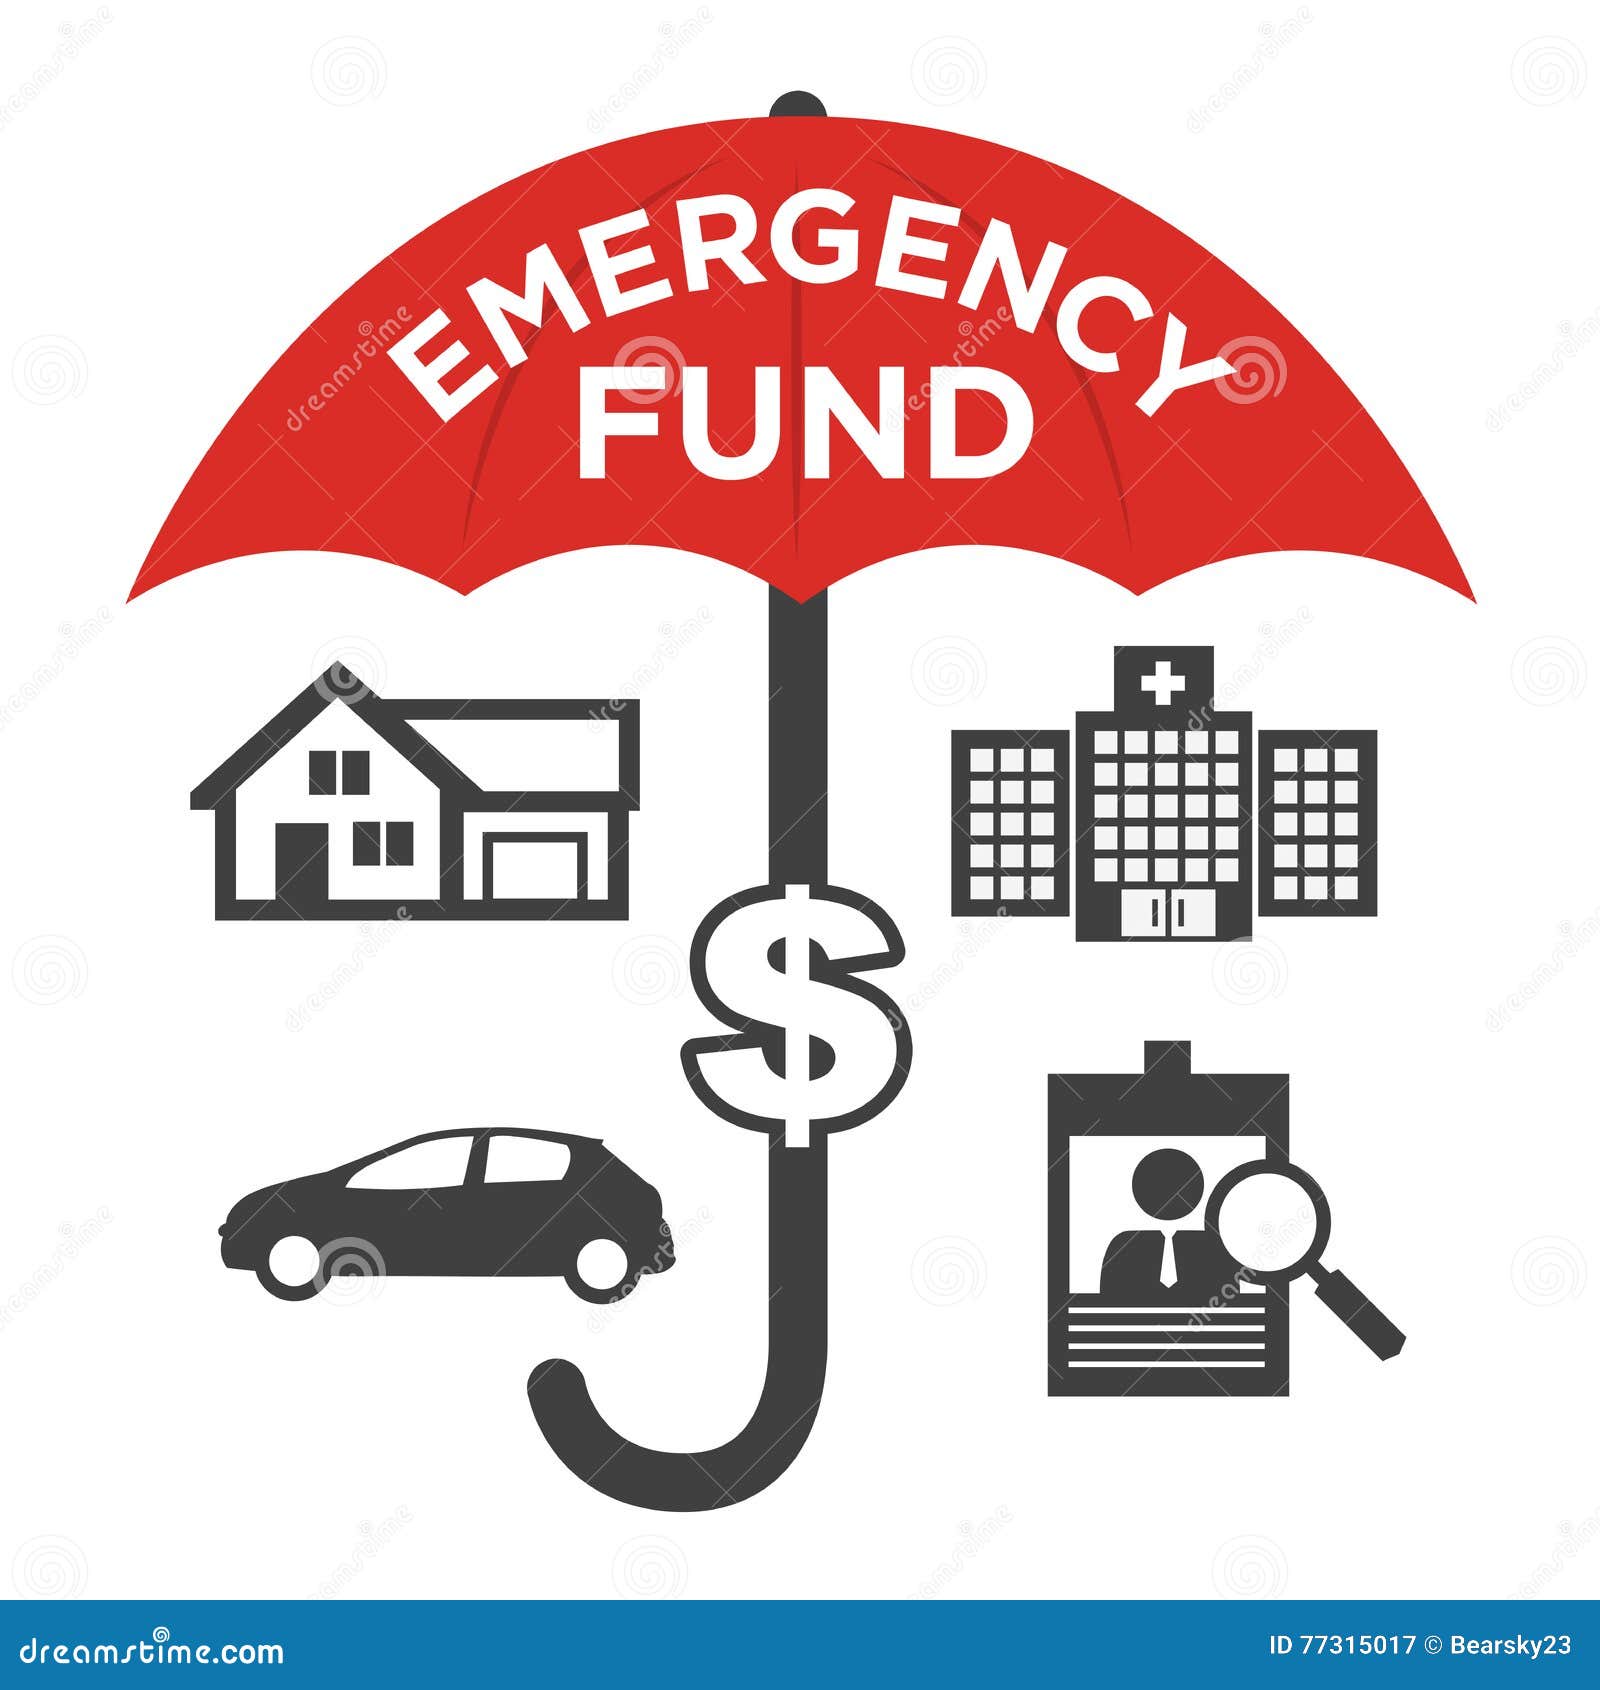 financial emergency fund icons with umbrella